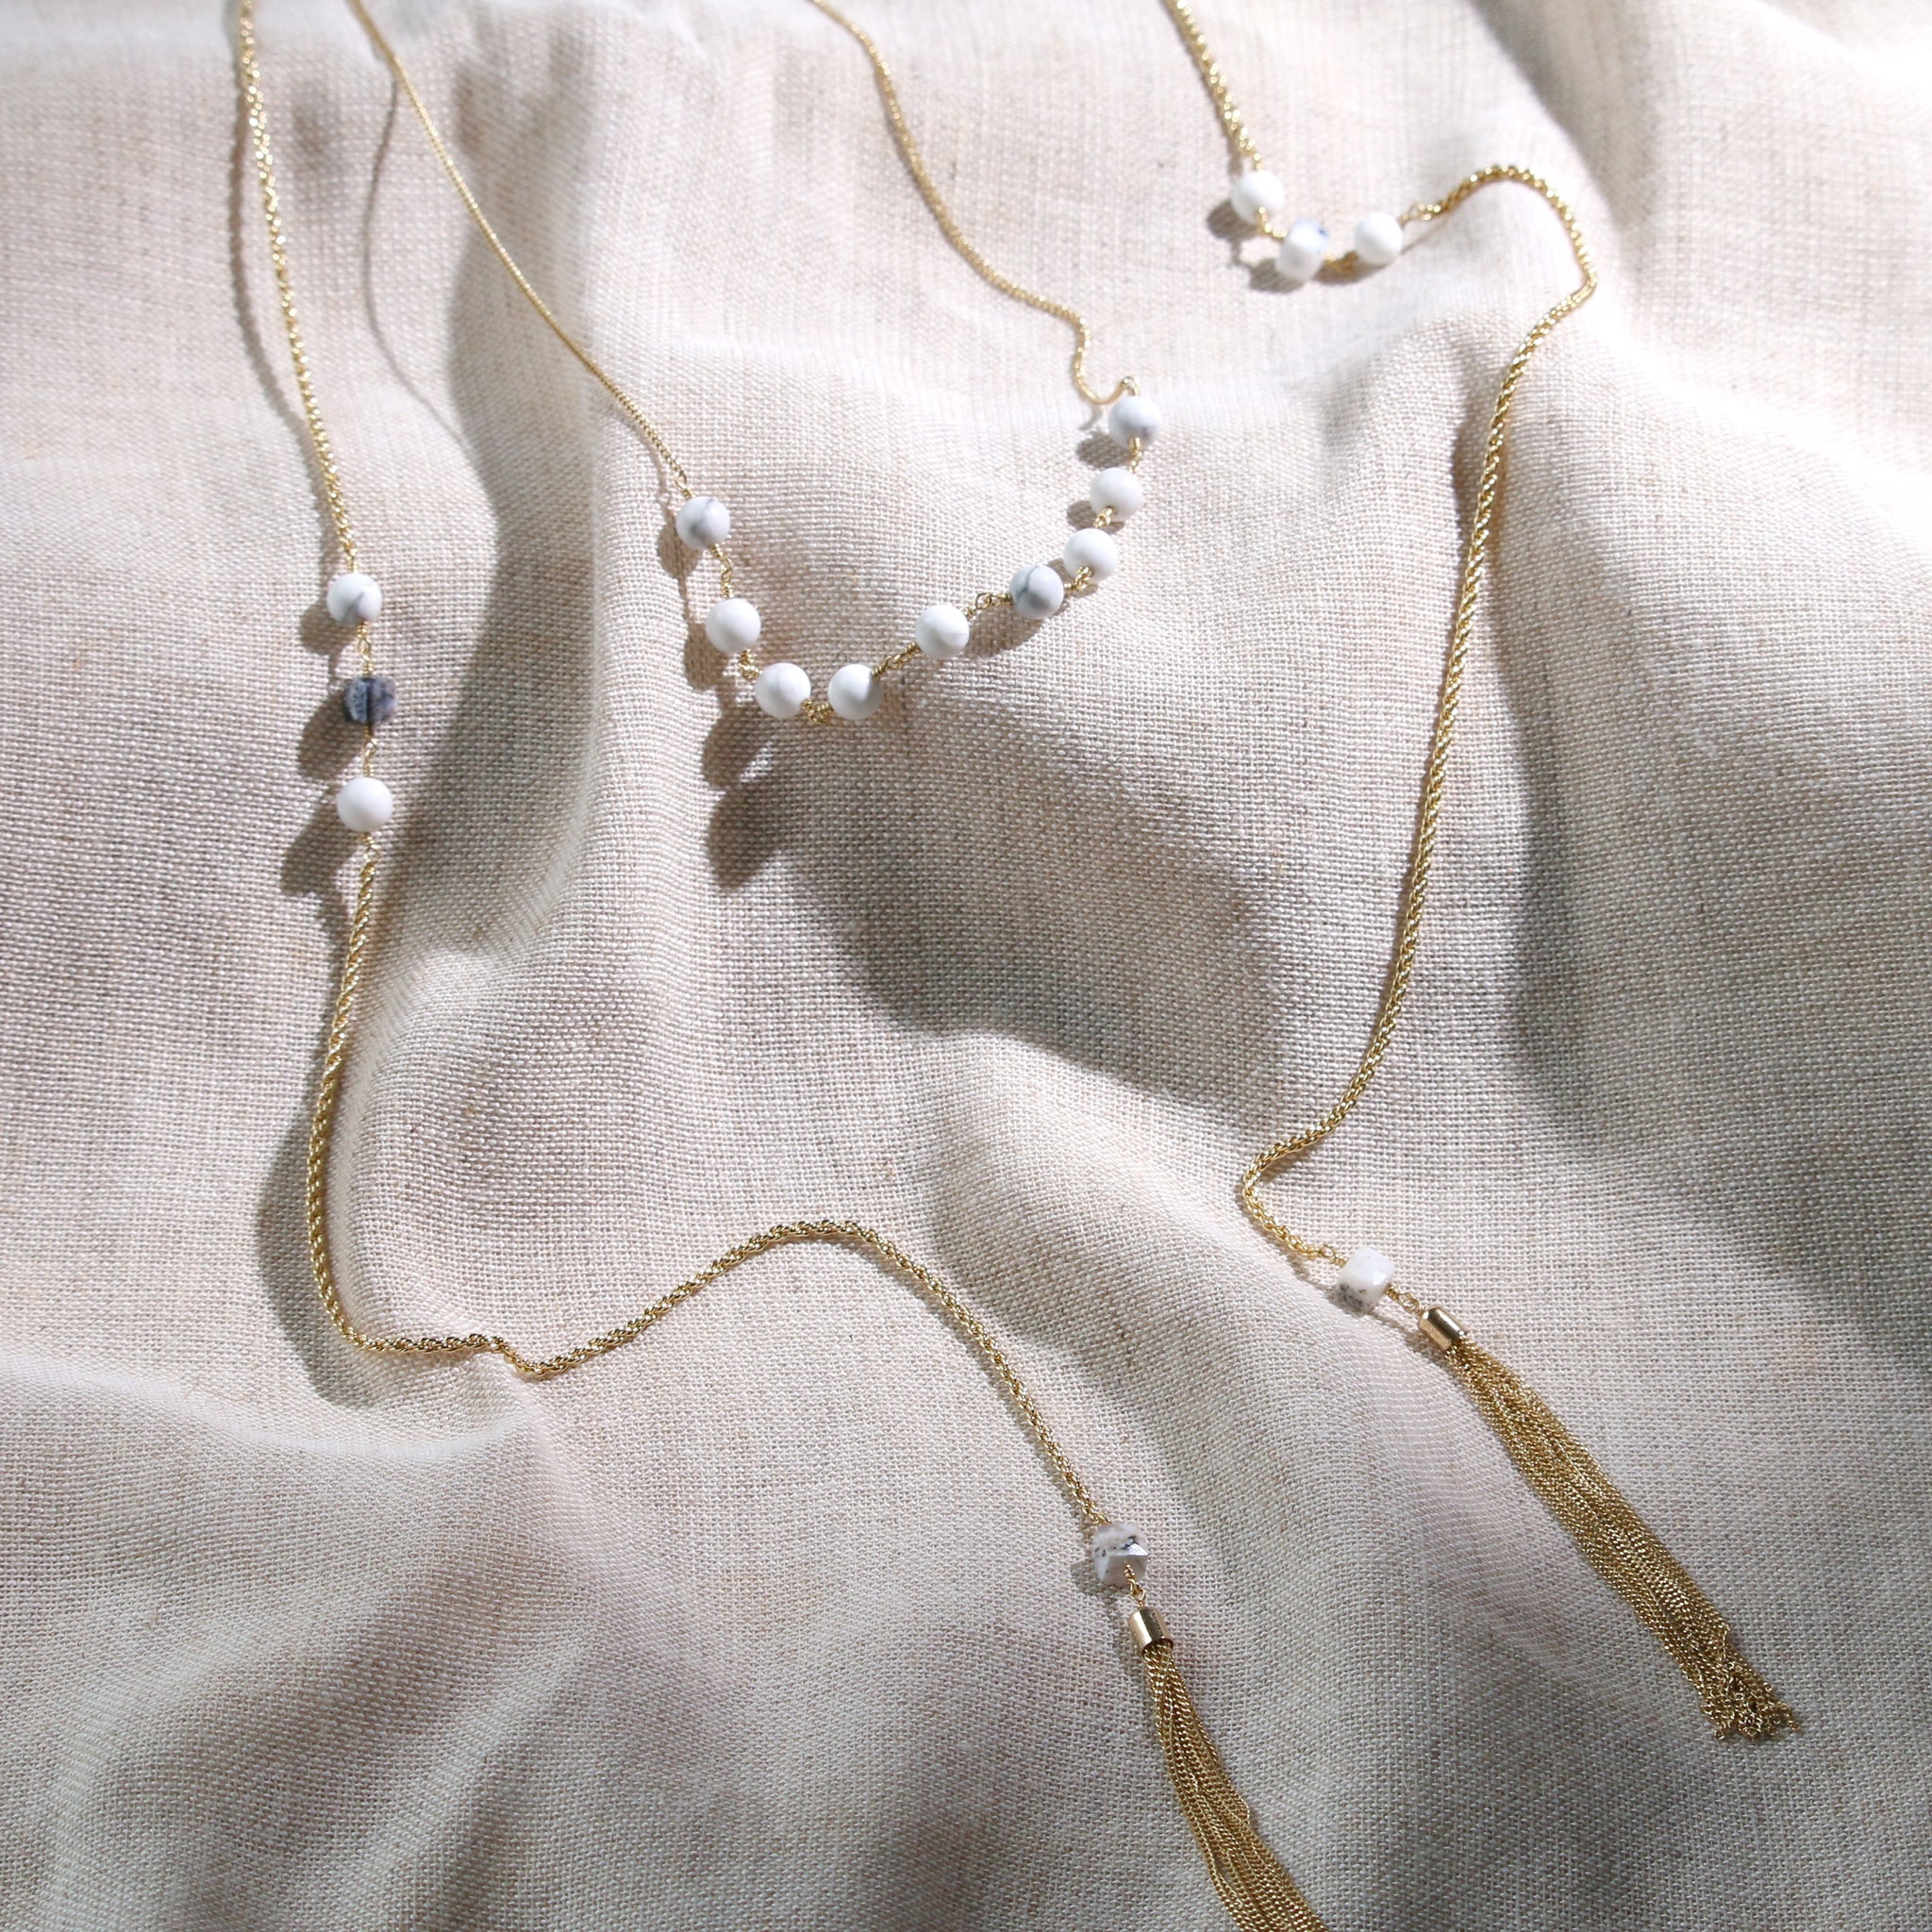 3WAY necklace using Haulite x Dendritic Opal